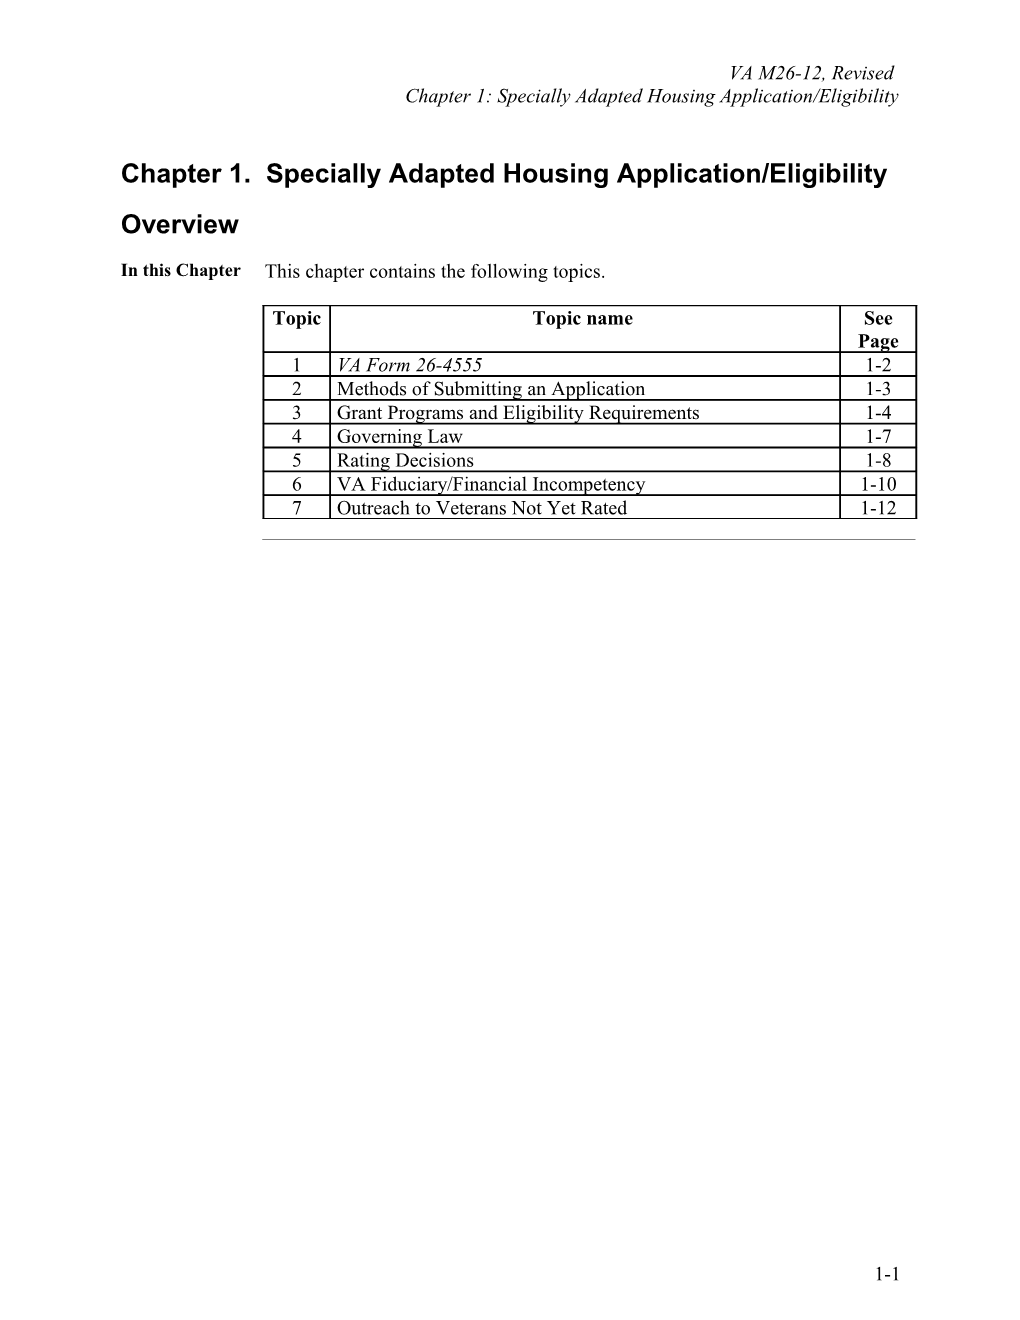 Chapter 1. Specially Adapted Housing Application/Eligibility